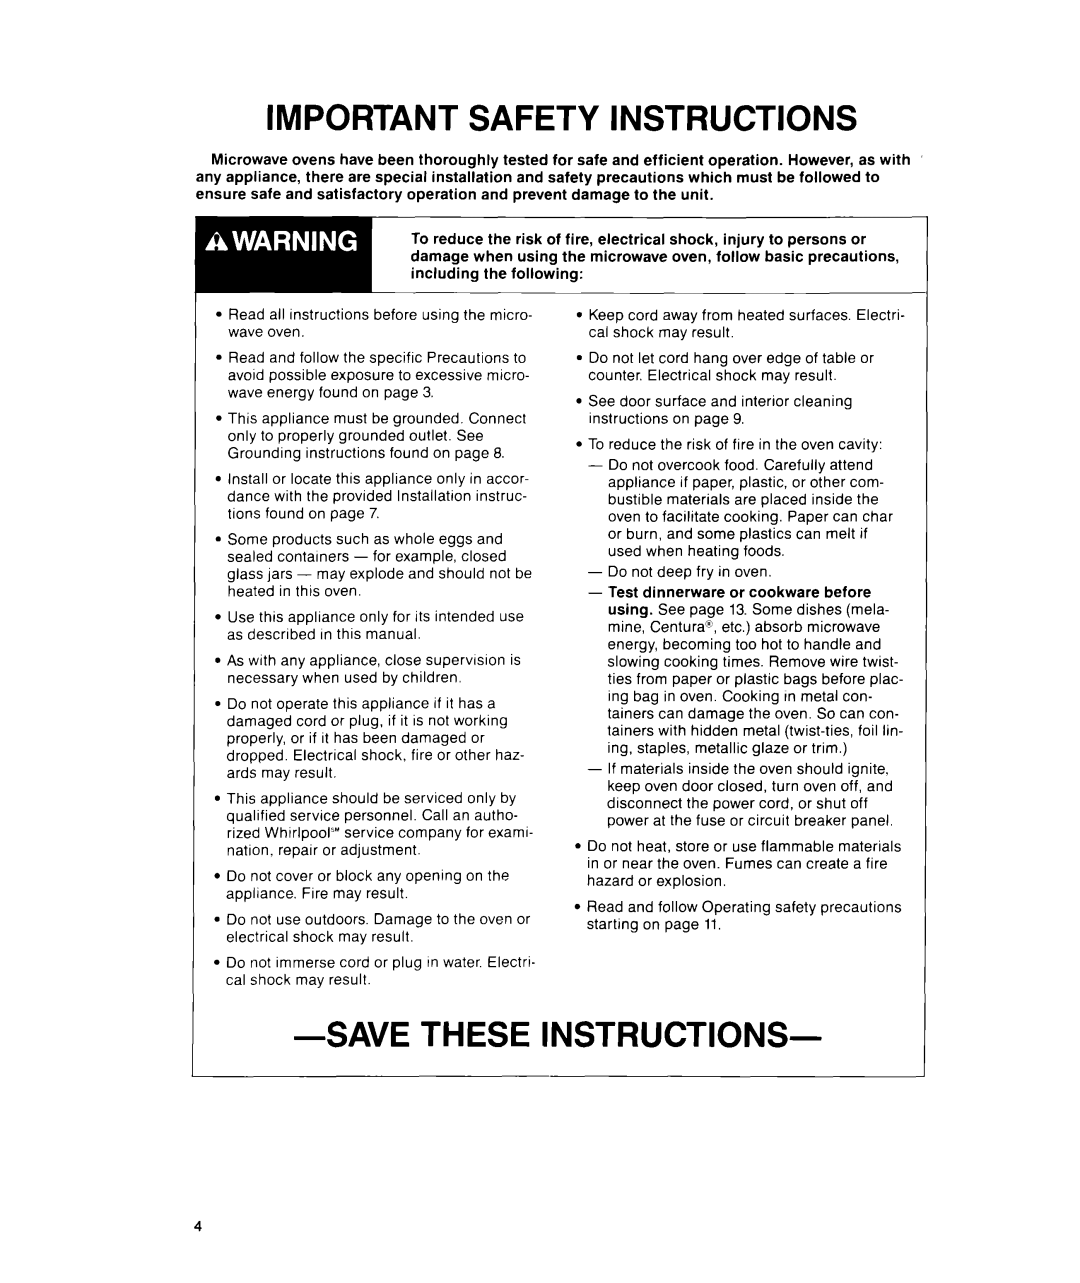 Whirlpool MS1600XW manual Important Safety Instructions, Savethese Instructions 